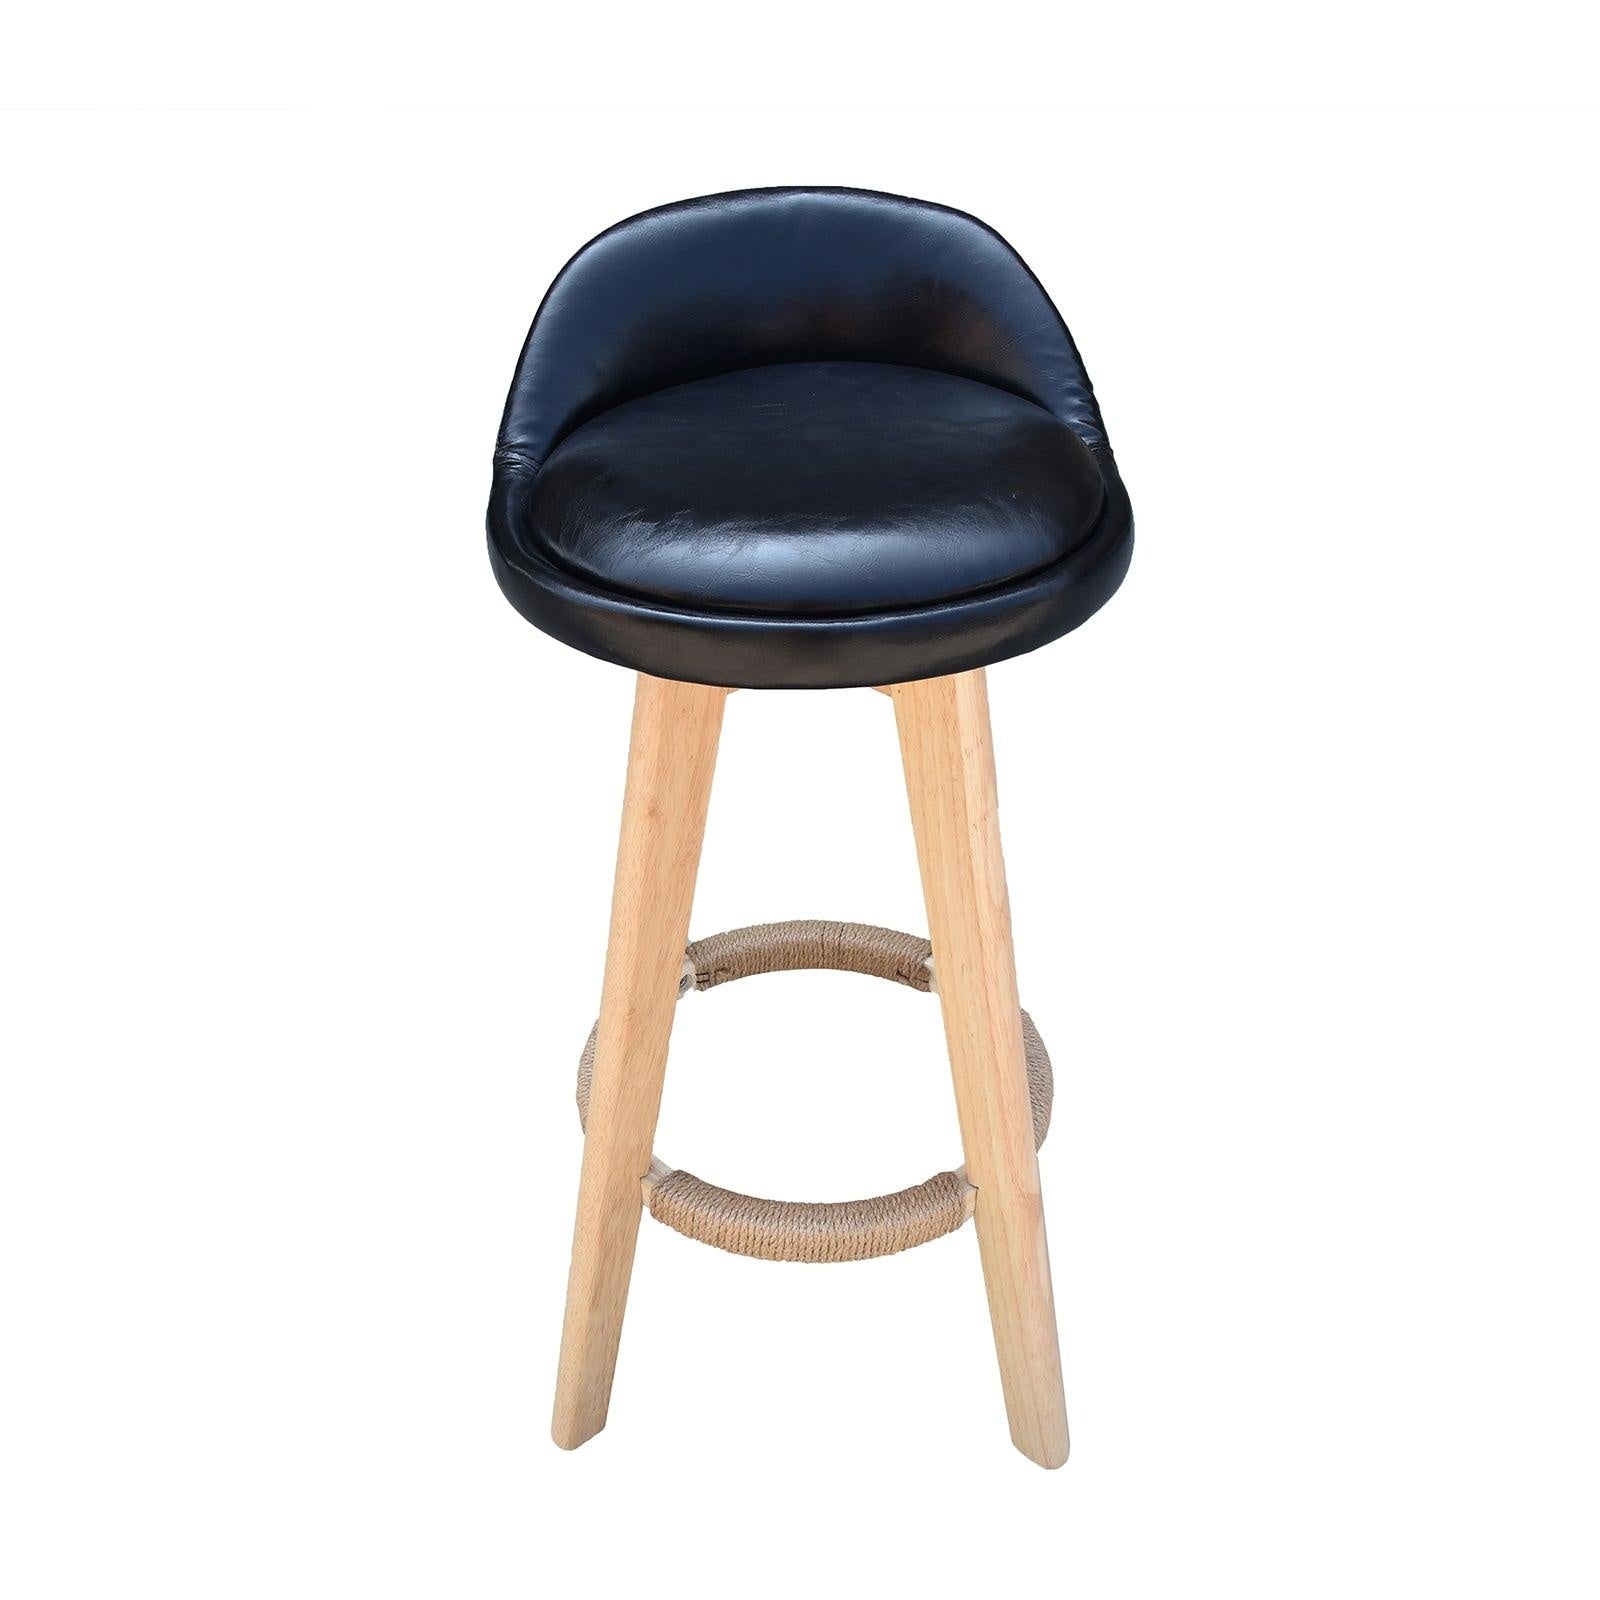 Milano Decor Phoenix Barstool Black Chairs Kitchen Dining Chair Bar Stool One Pack Deals499